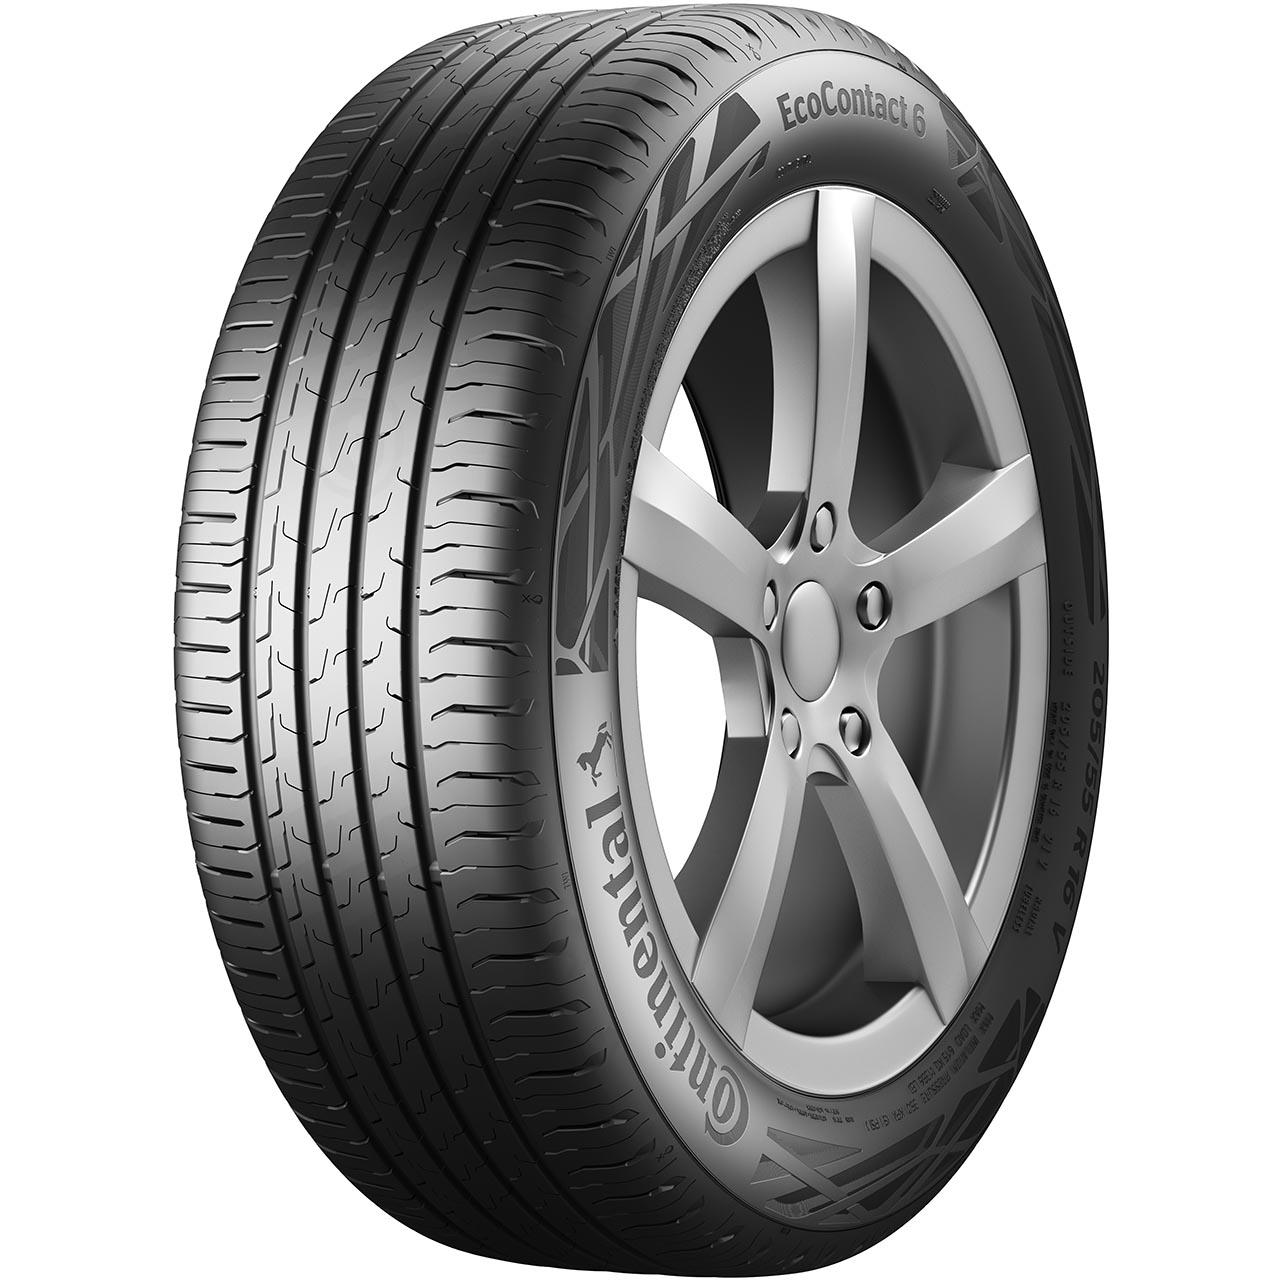 Continental ECOCONTACT 6 225/45R18 91W MO